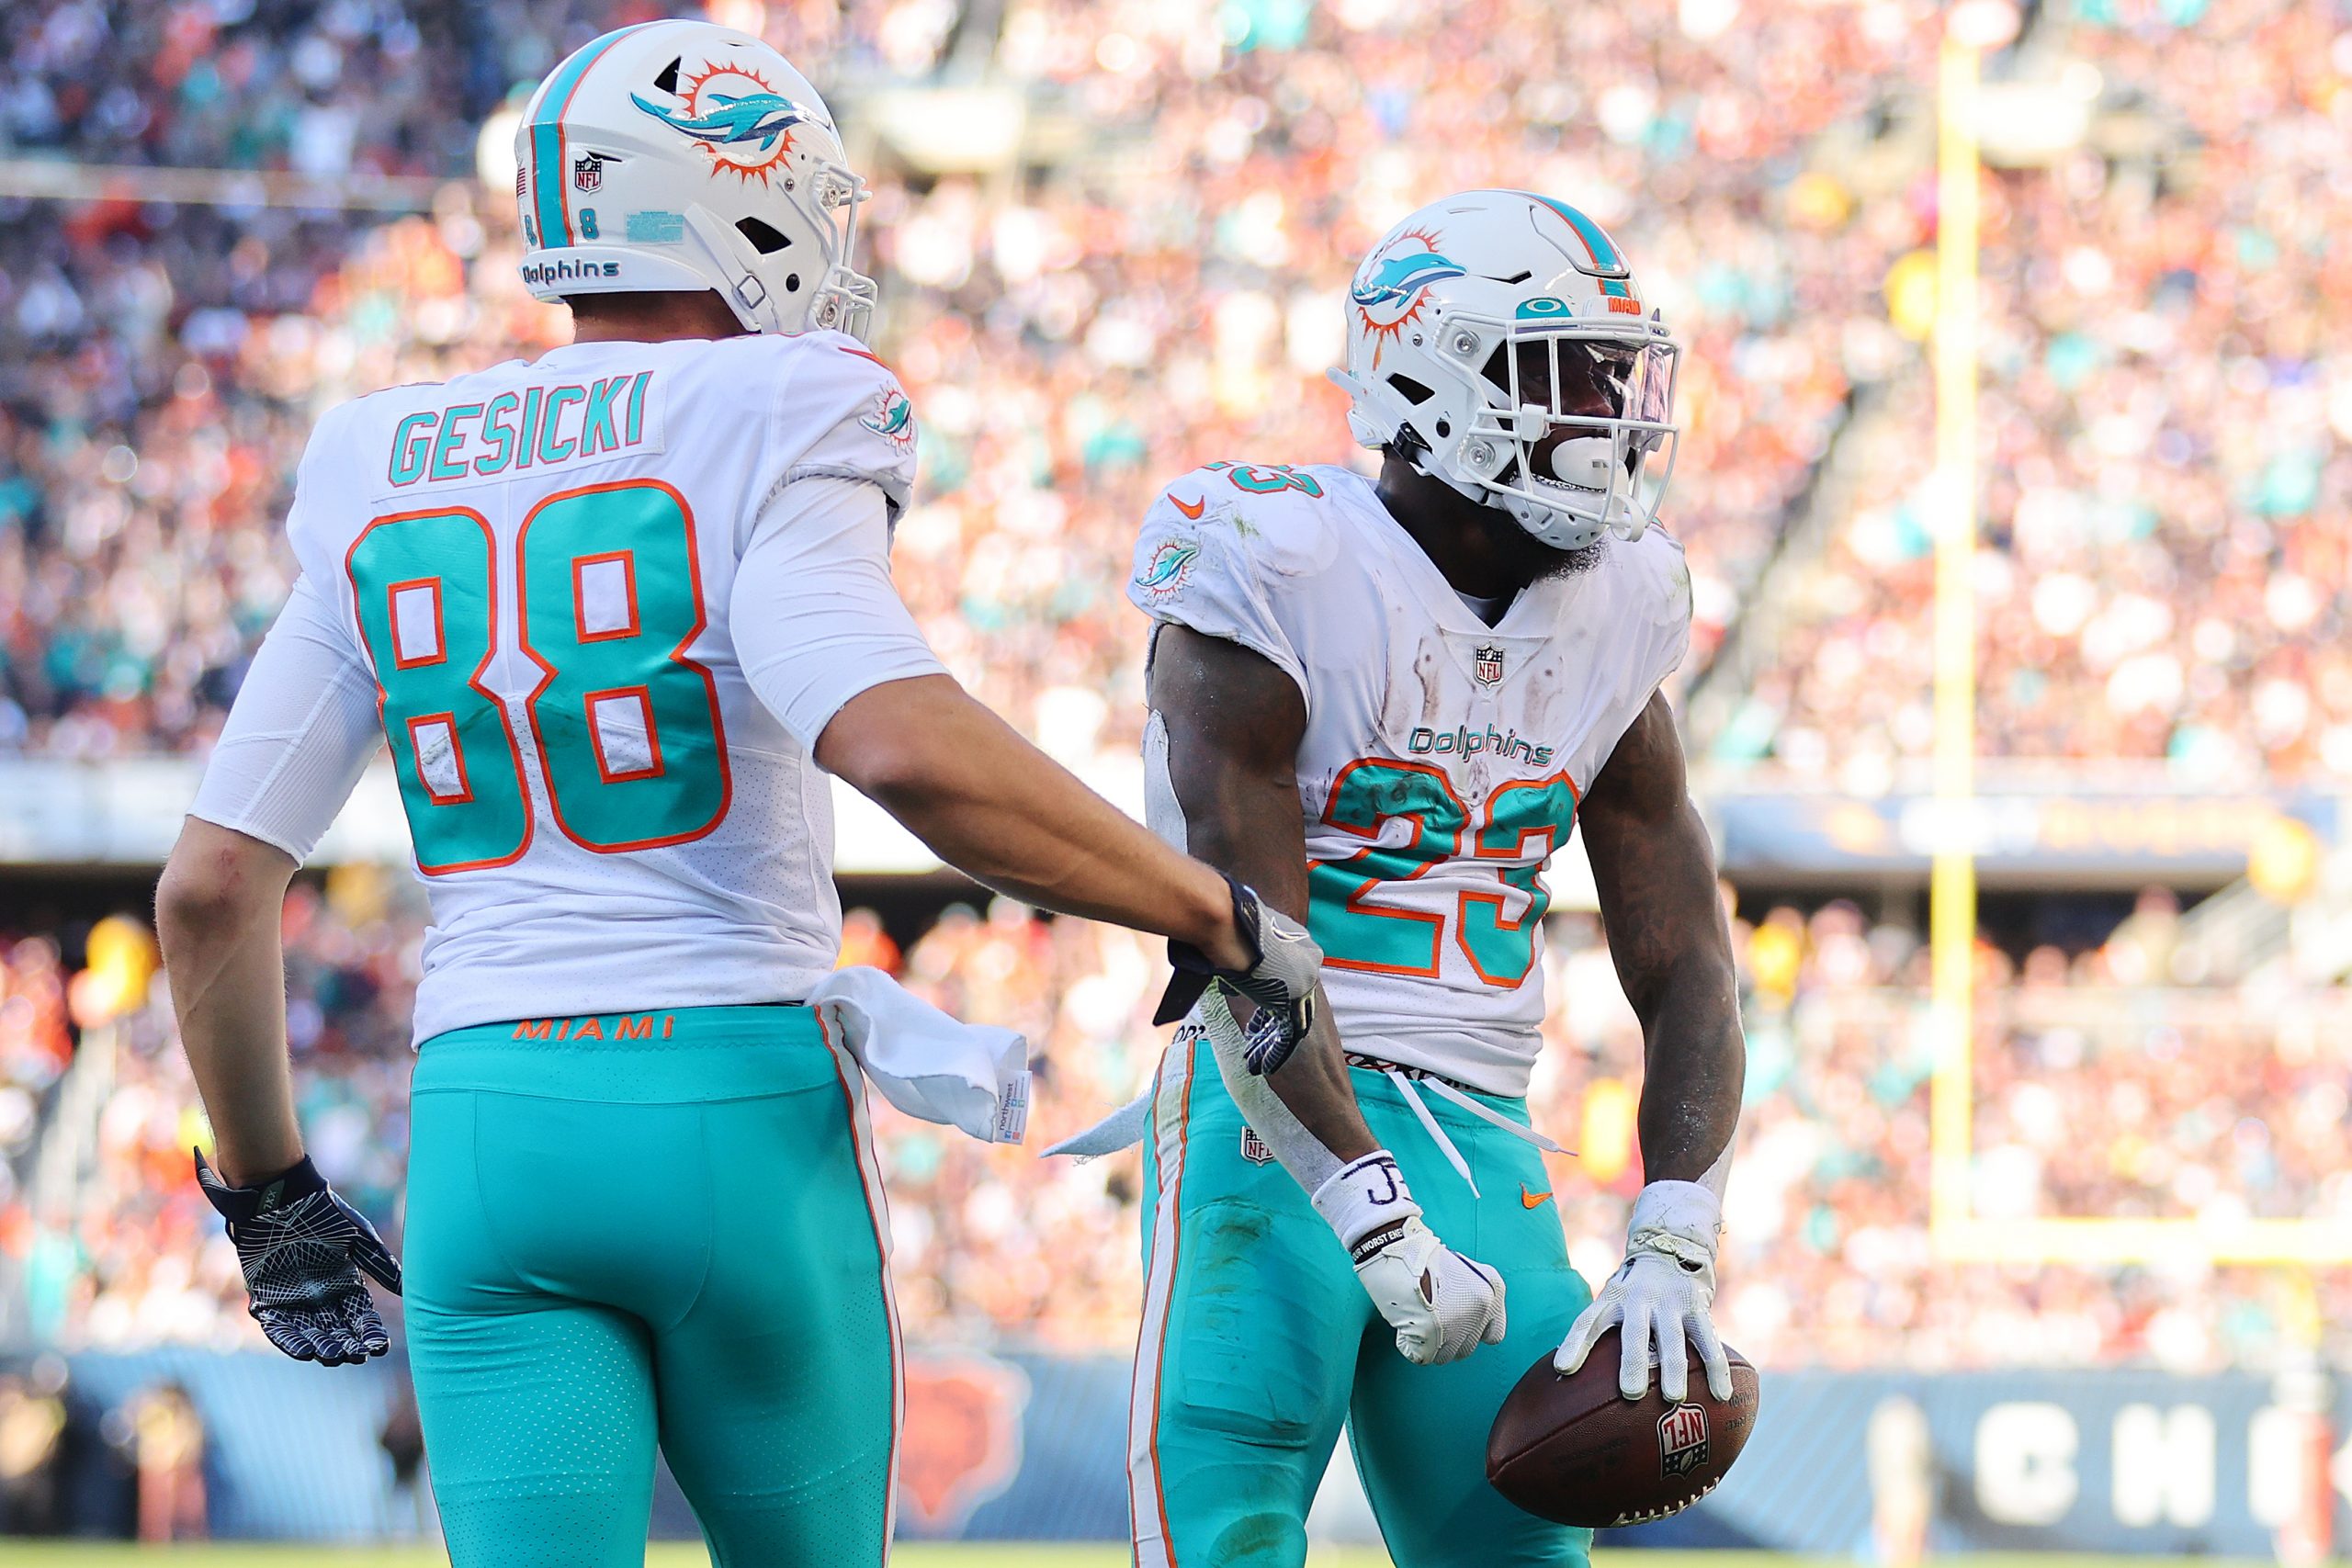 Jeff Wilson Jr. #23 of the Miami Dolphins celebrates a touchdown against the Chicago Bears at Soldi...